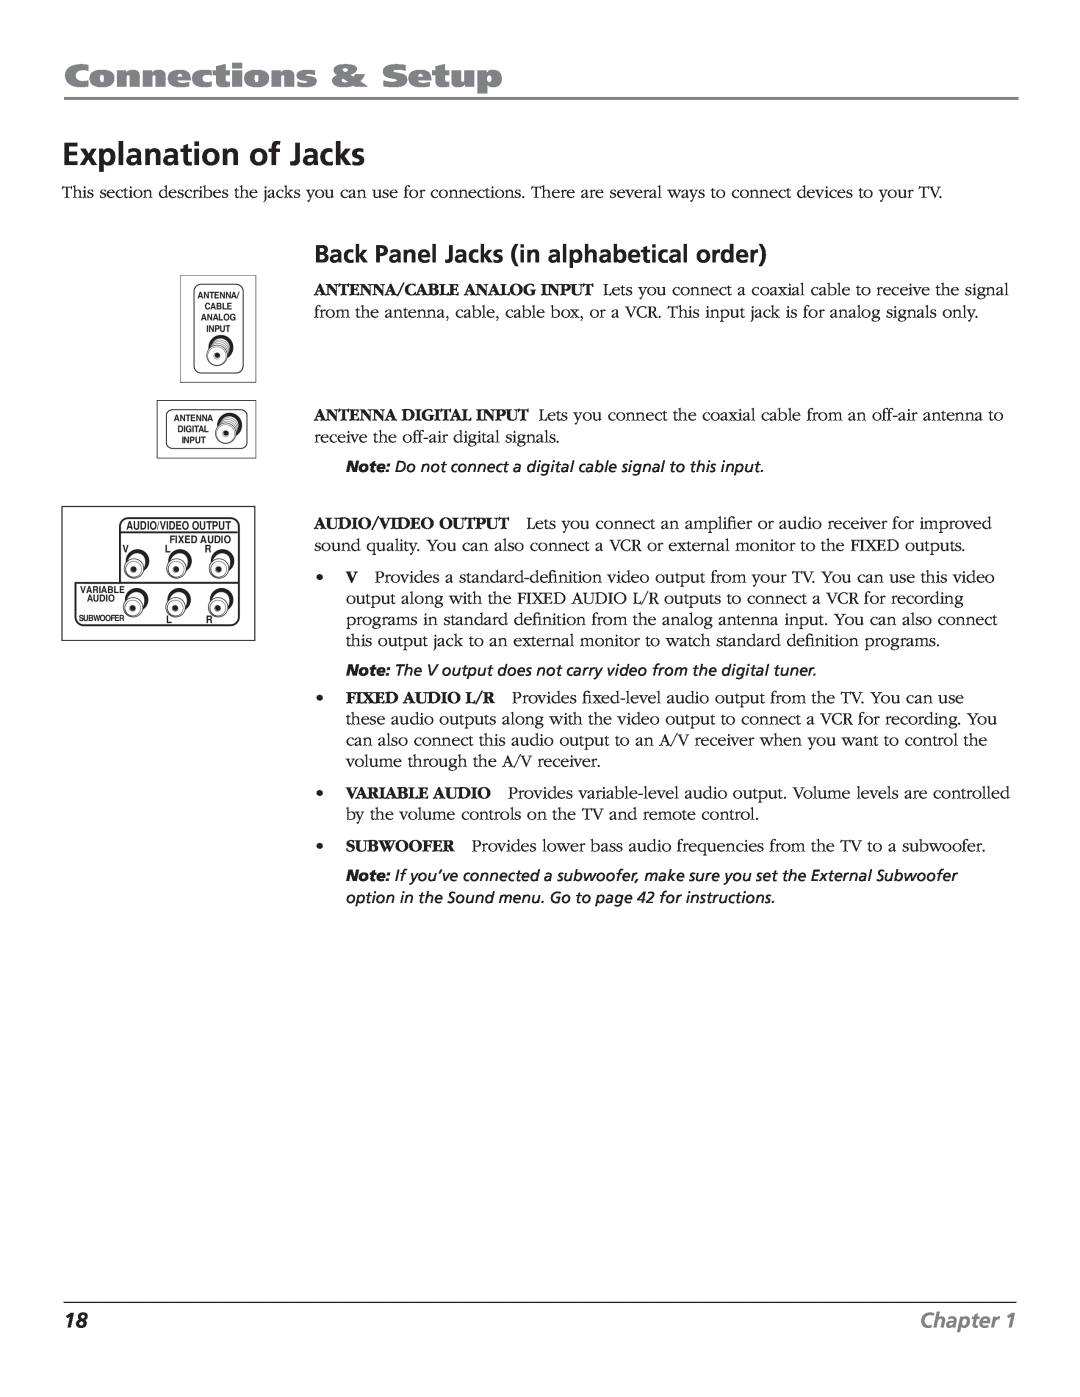 RCA R52WH79 manual Explanation of Jacks, Back Panel Jacks in alphabetical order, Connections & Setup, Chapter 